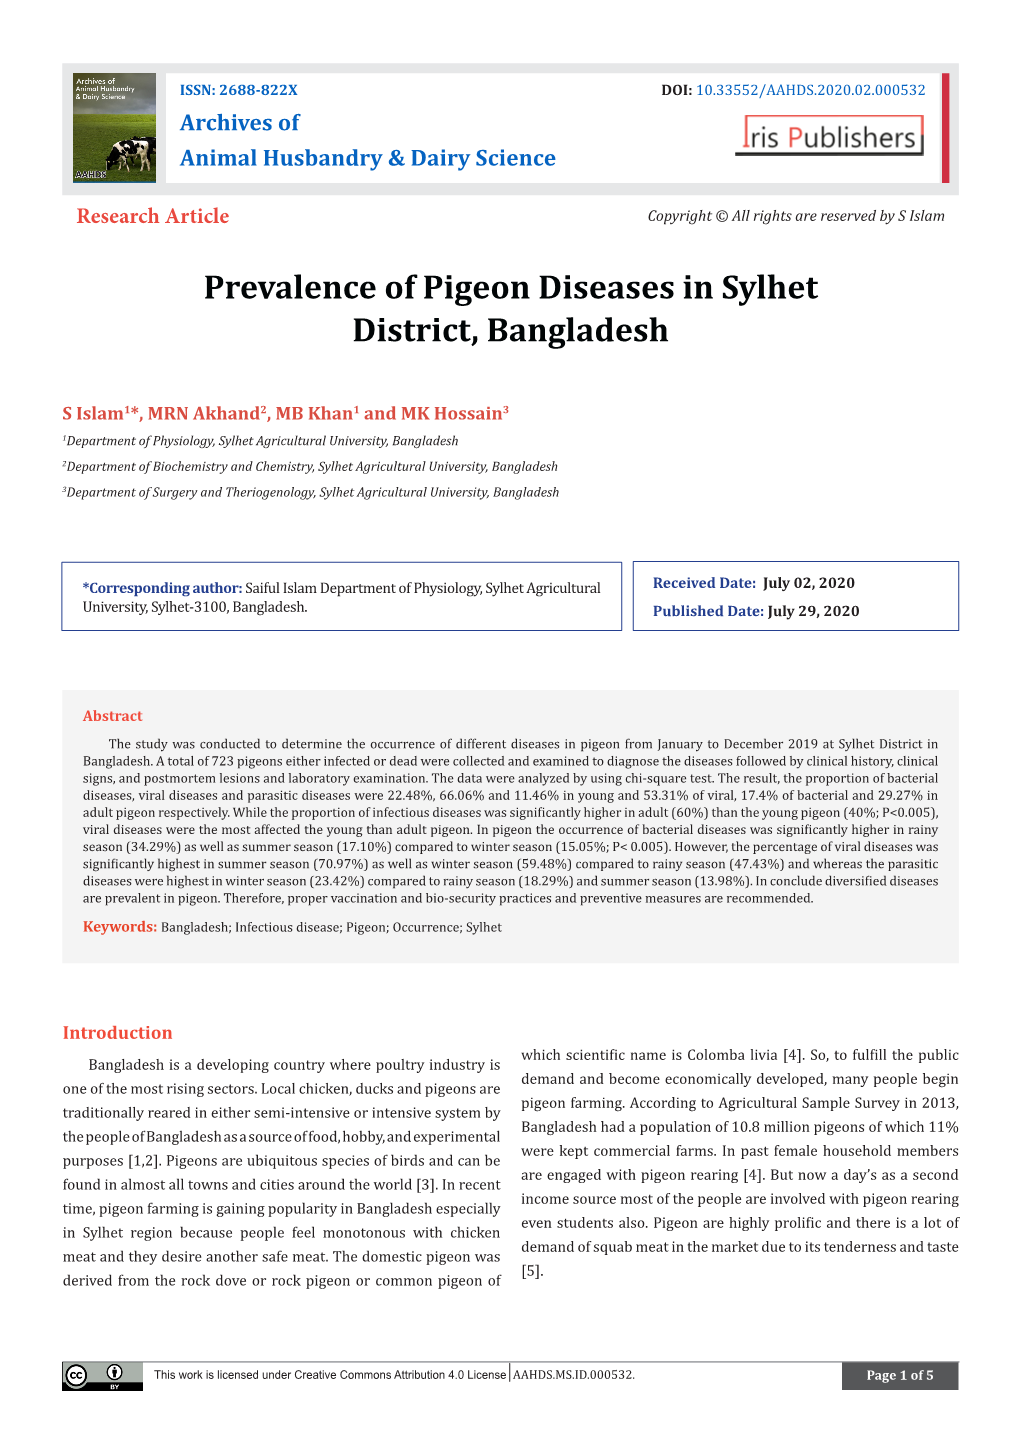 Prevalence of Pigeon Diseases in Sylhet District, Bangladesh